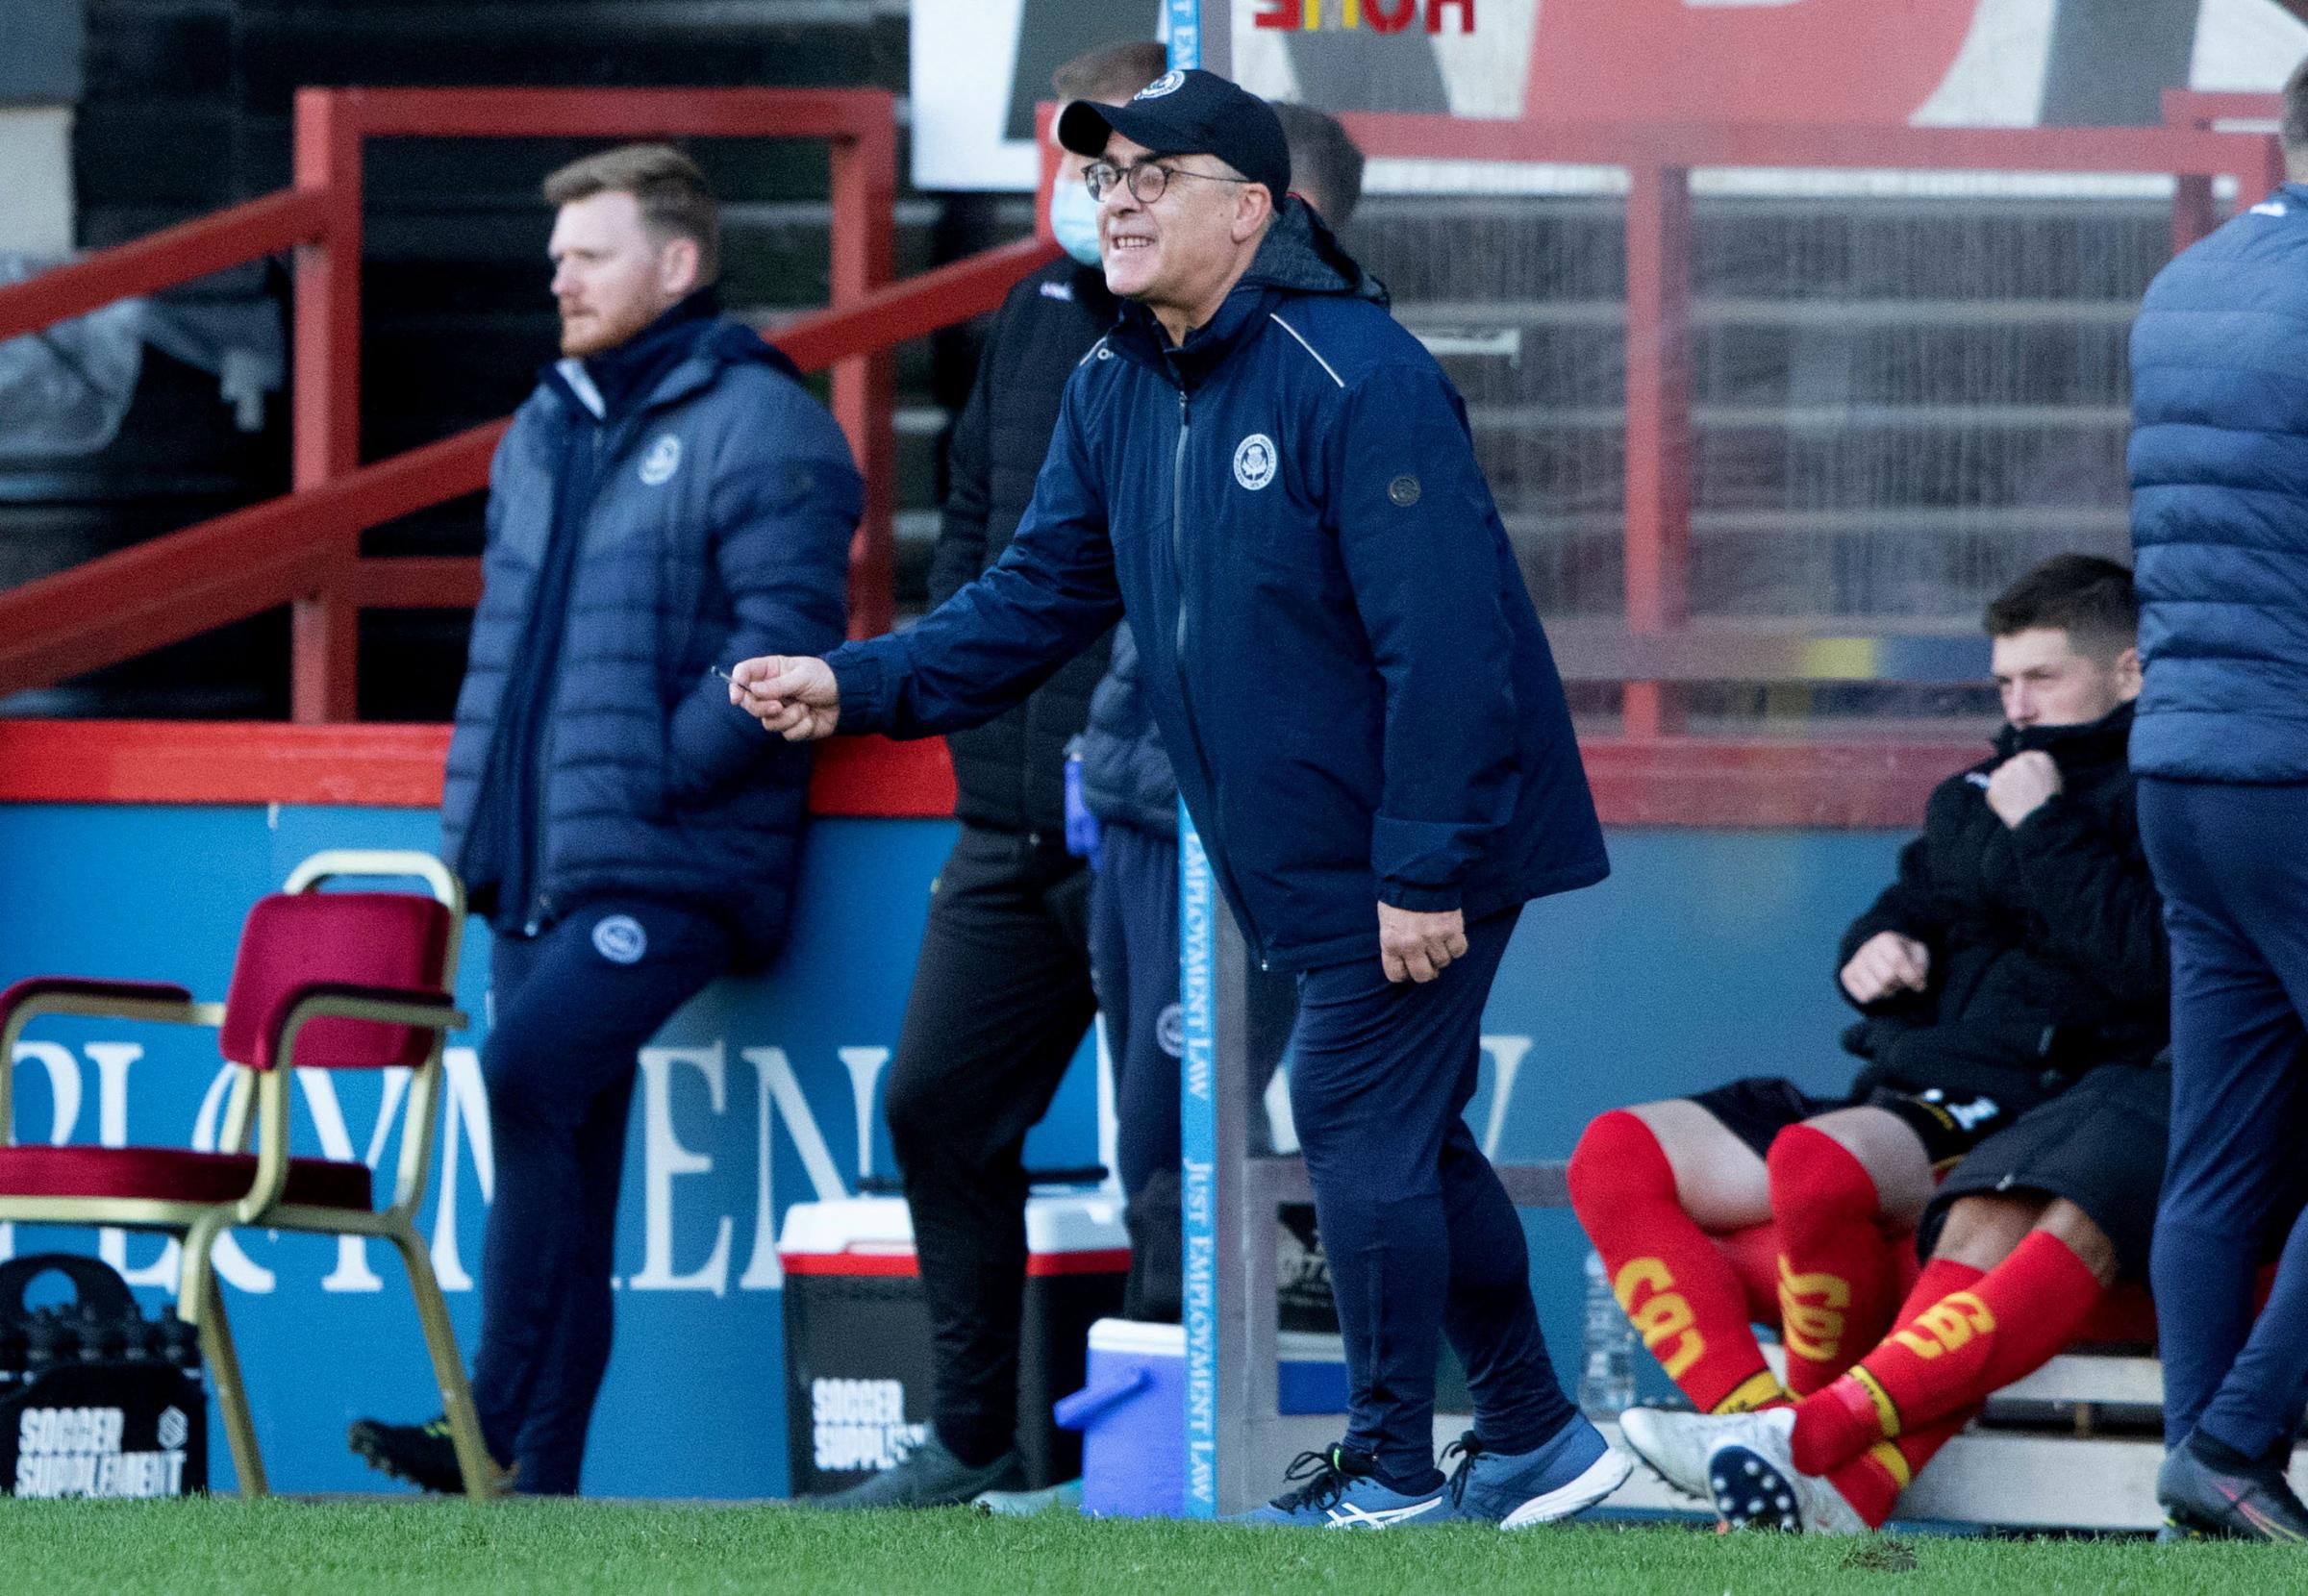 Partick Thistle must start turning draws into wins, warns Ian McCall